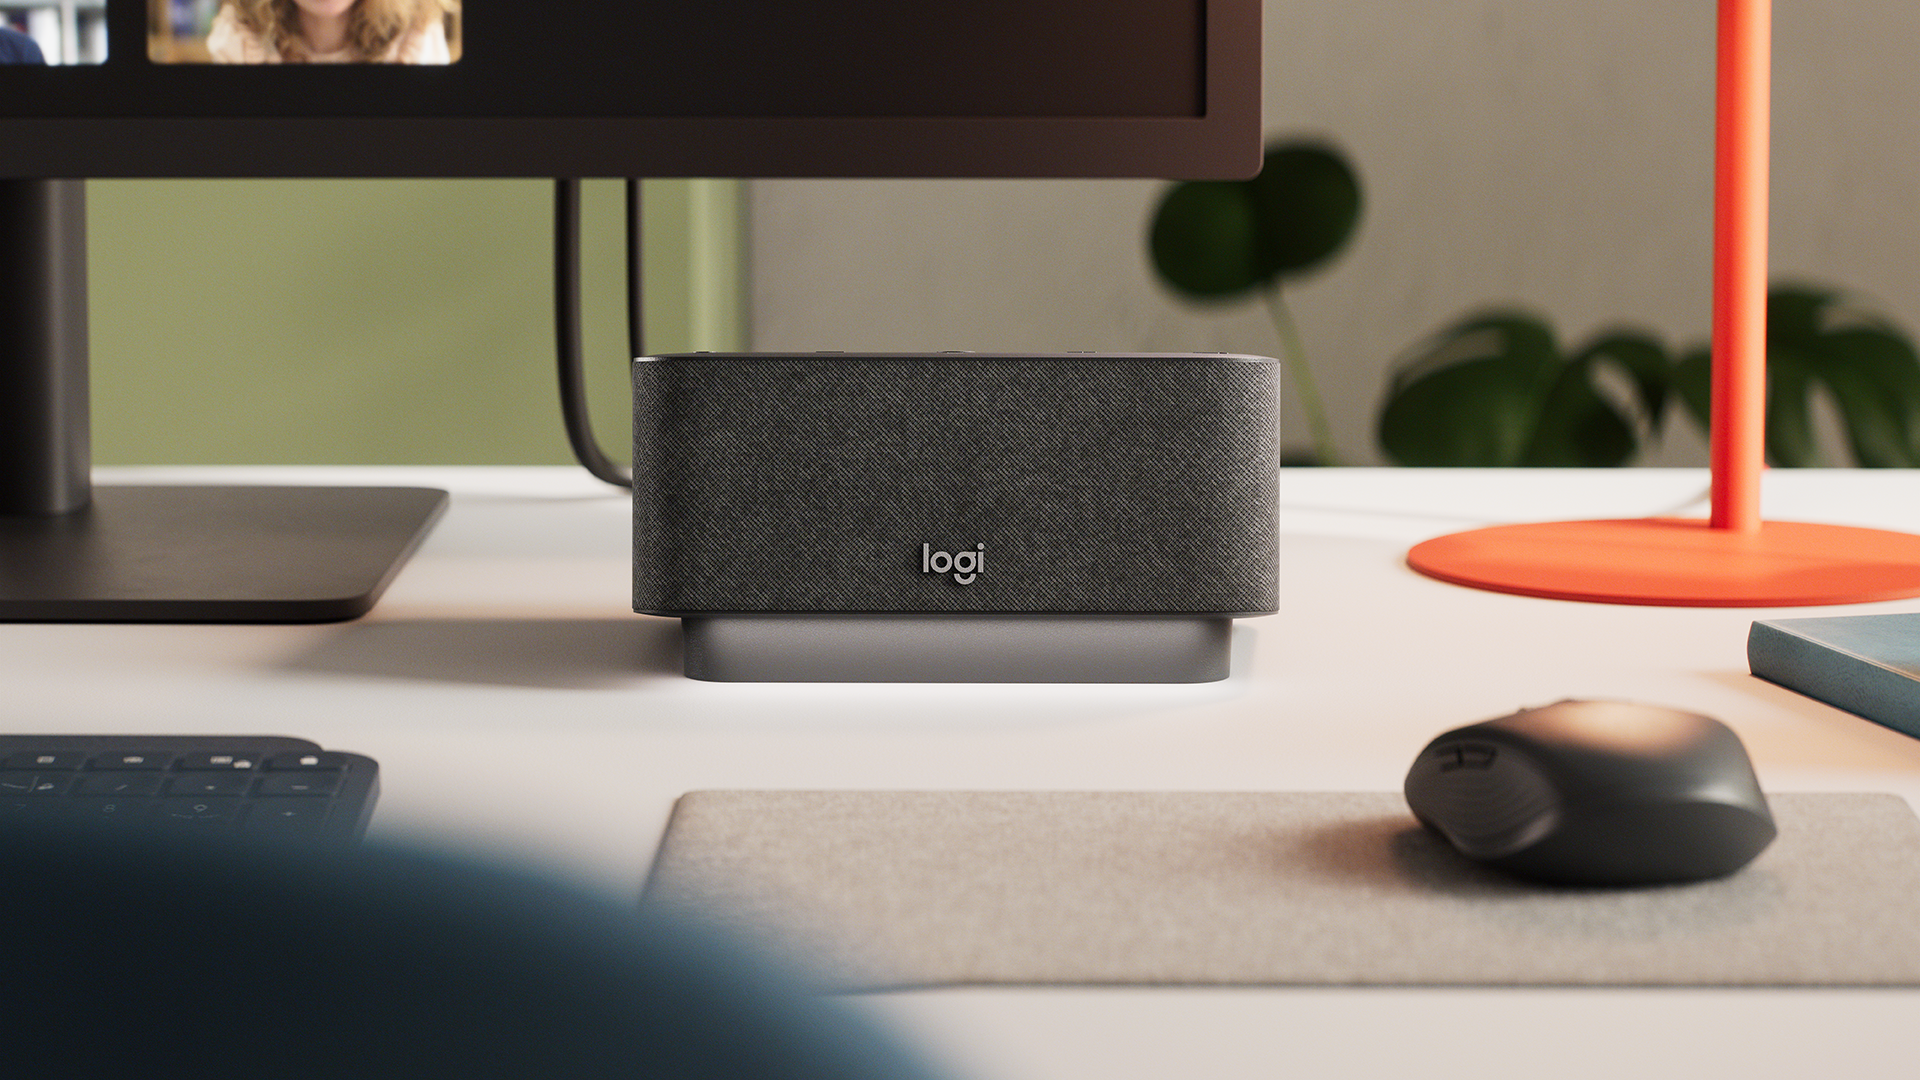 The noise cancellation function prevents annoying ambient noise, while touching the main button of the Logi Dock the user can instantly connect to video conferences (Credit: Logitech Press)